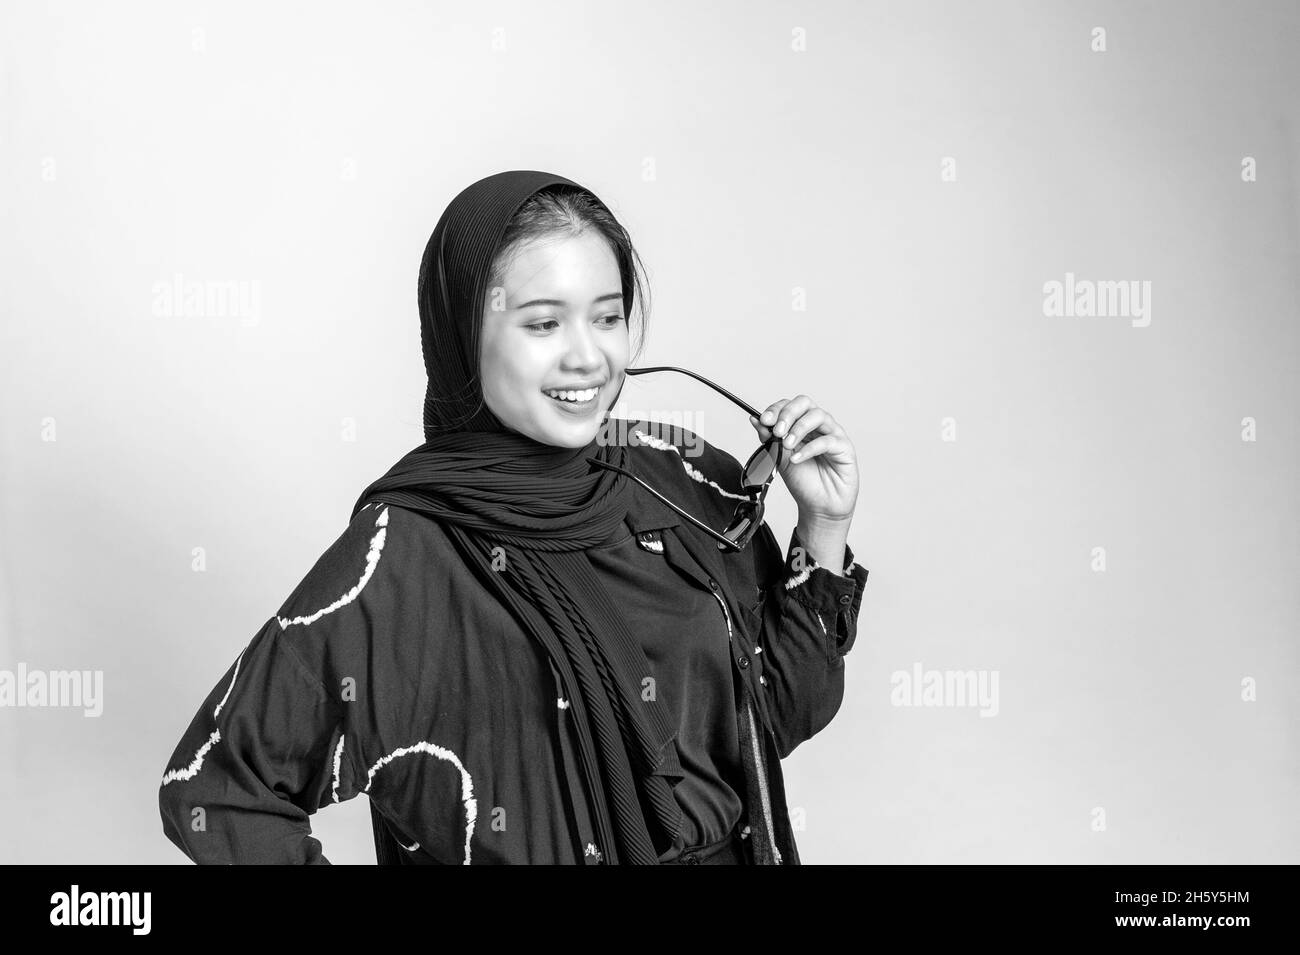 Indonesian female Muslim wearing hijab  in black and white portrait Stock Photo